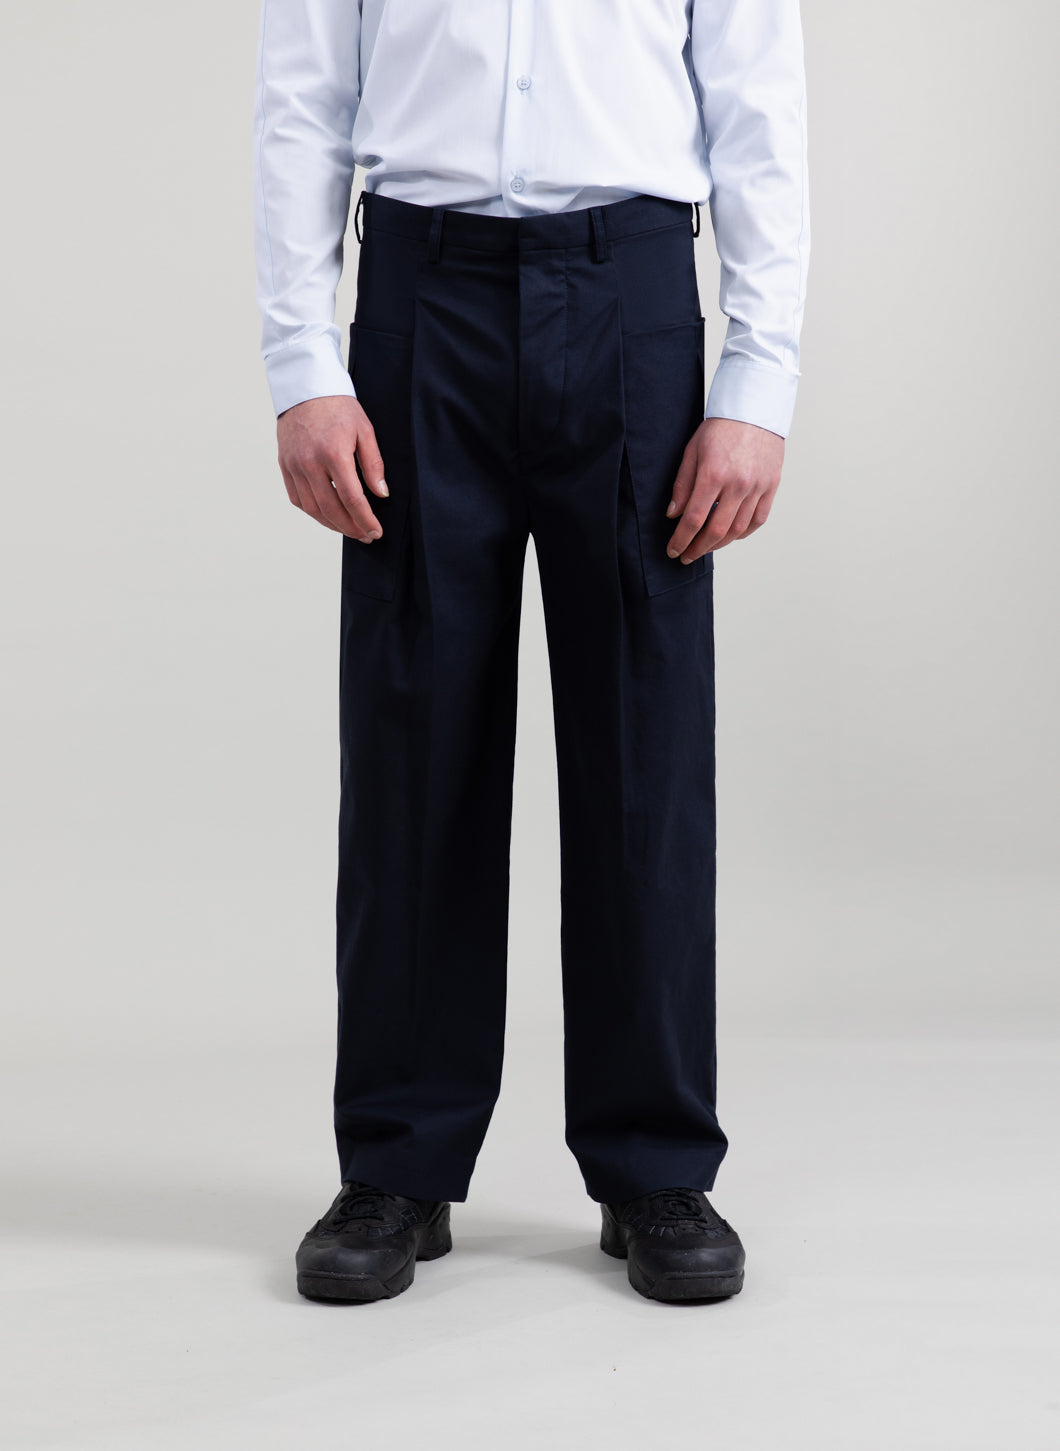 Workwear Pants in Navy Blue Cotton Twill